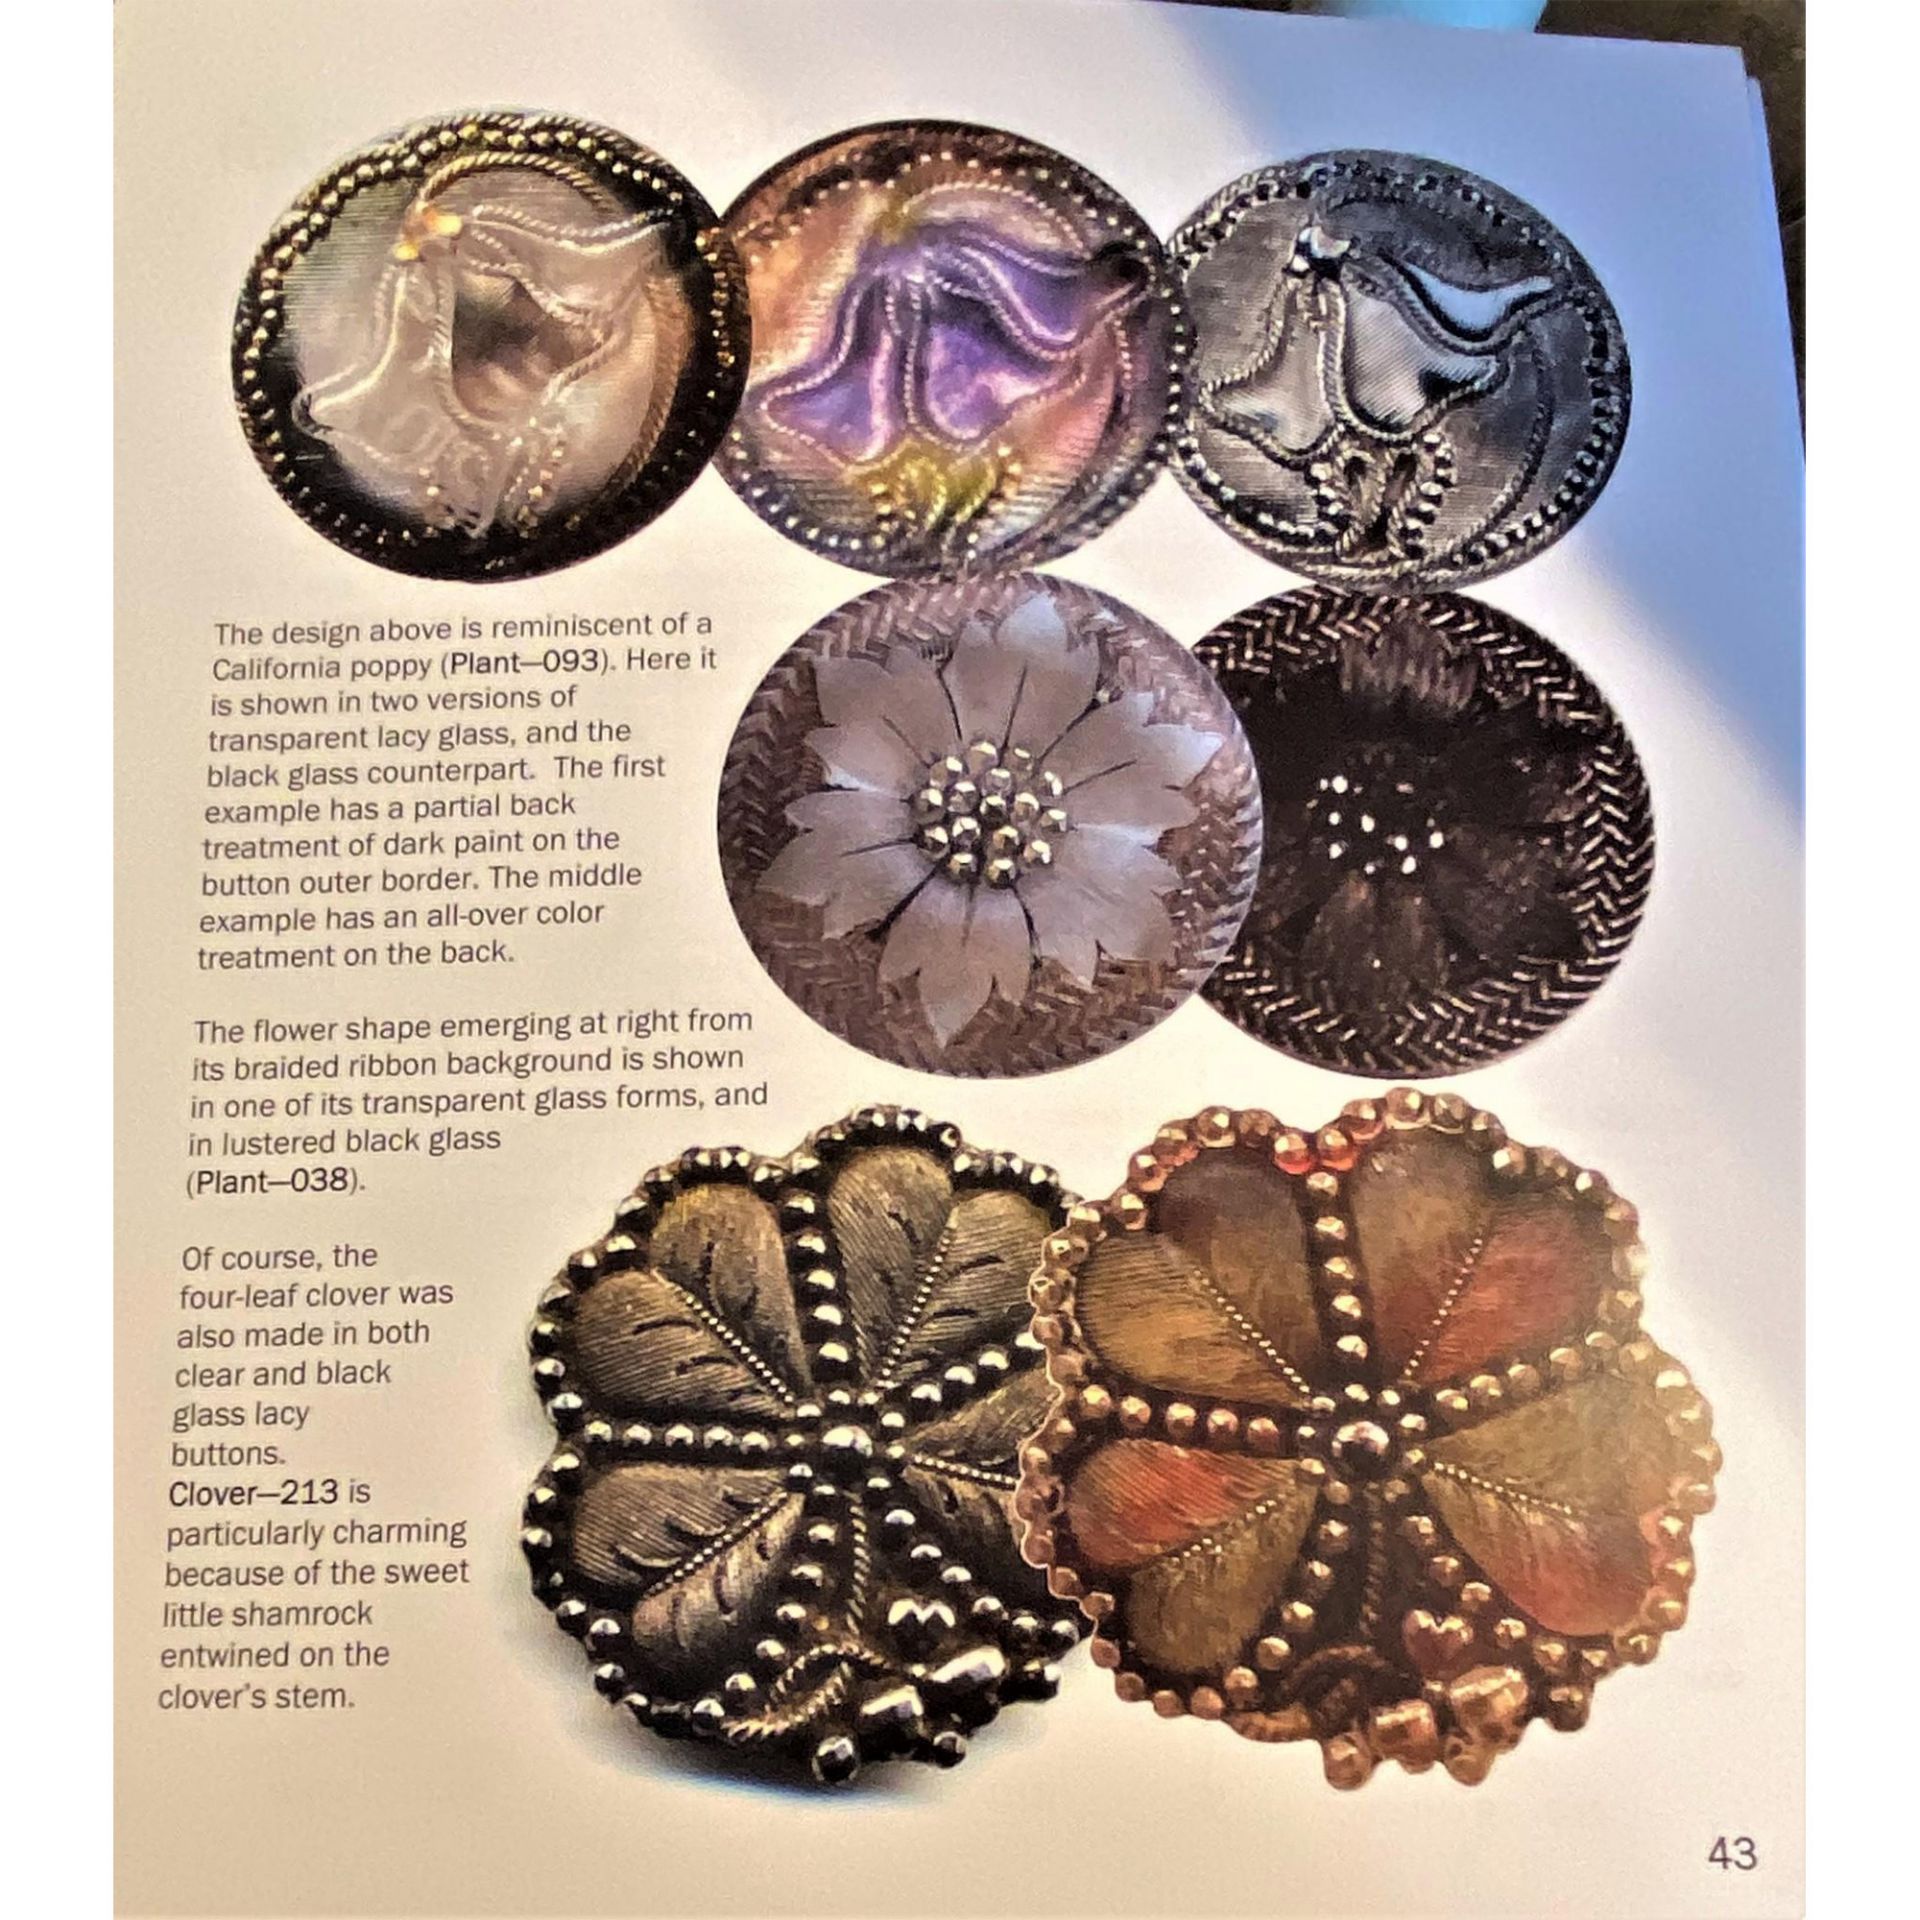 A Colorful Book On Lacy Glass Buttons - Image 3 of 4